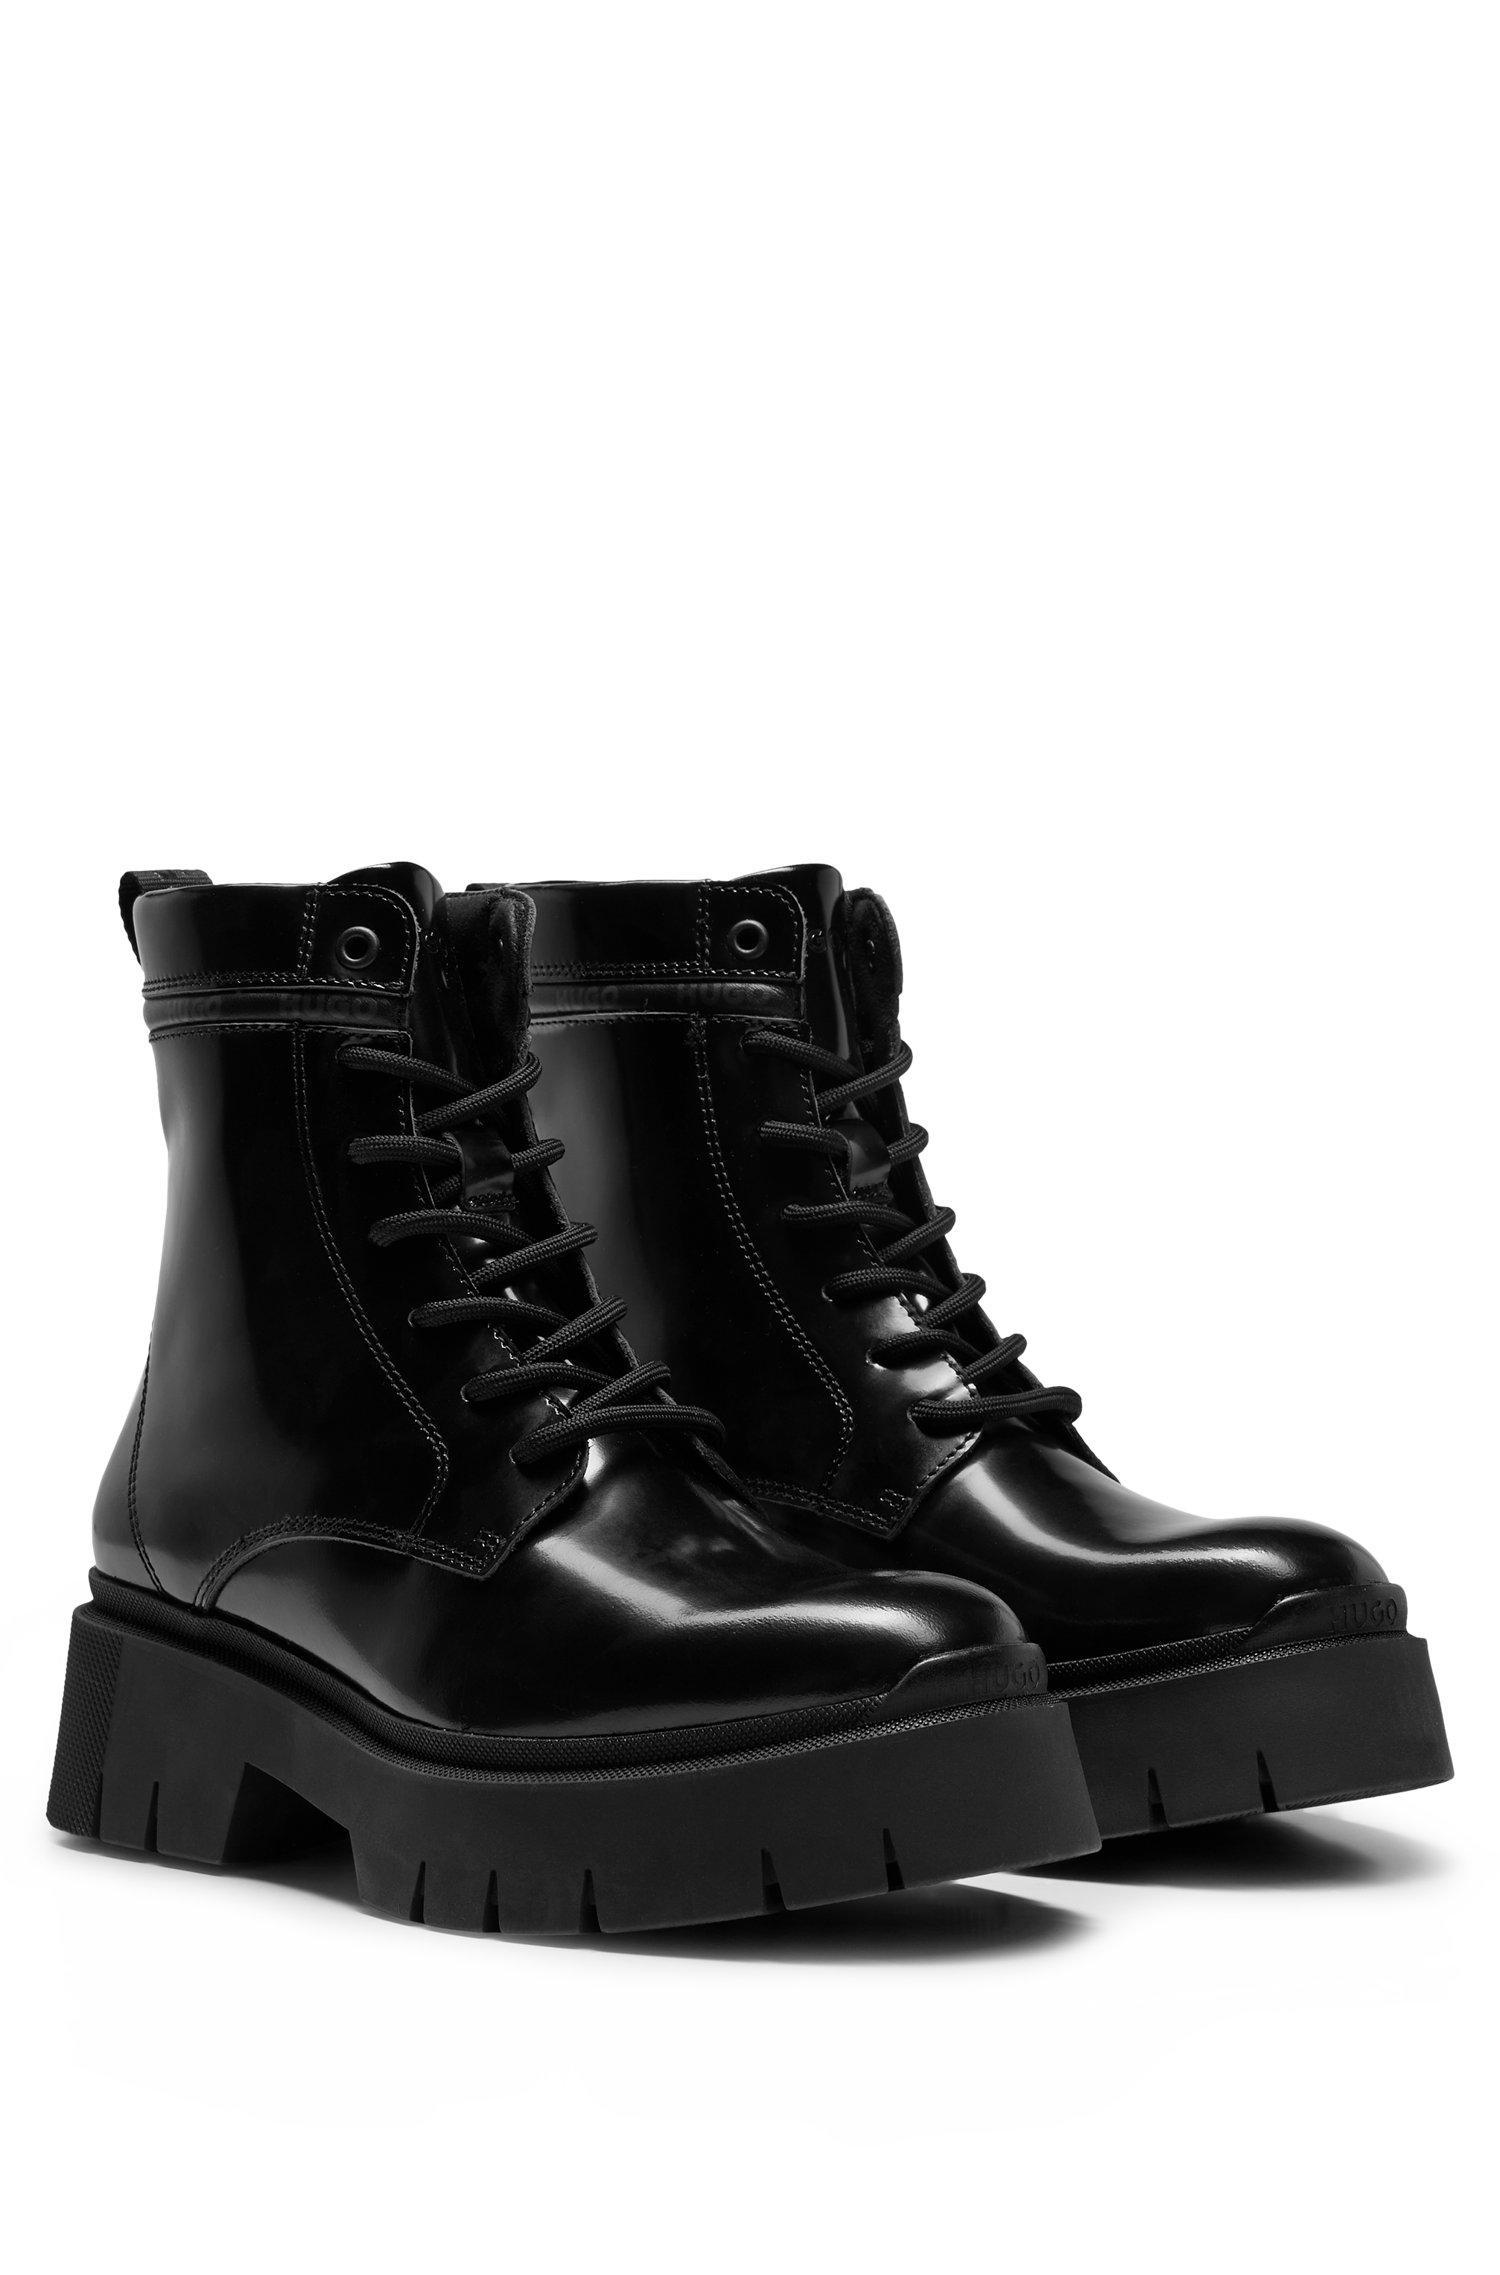 BOSS by HUGO BOSS Lace-up Leather Boots With Branded Collar Trim in ...